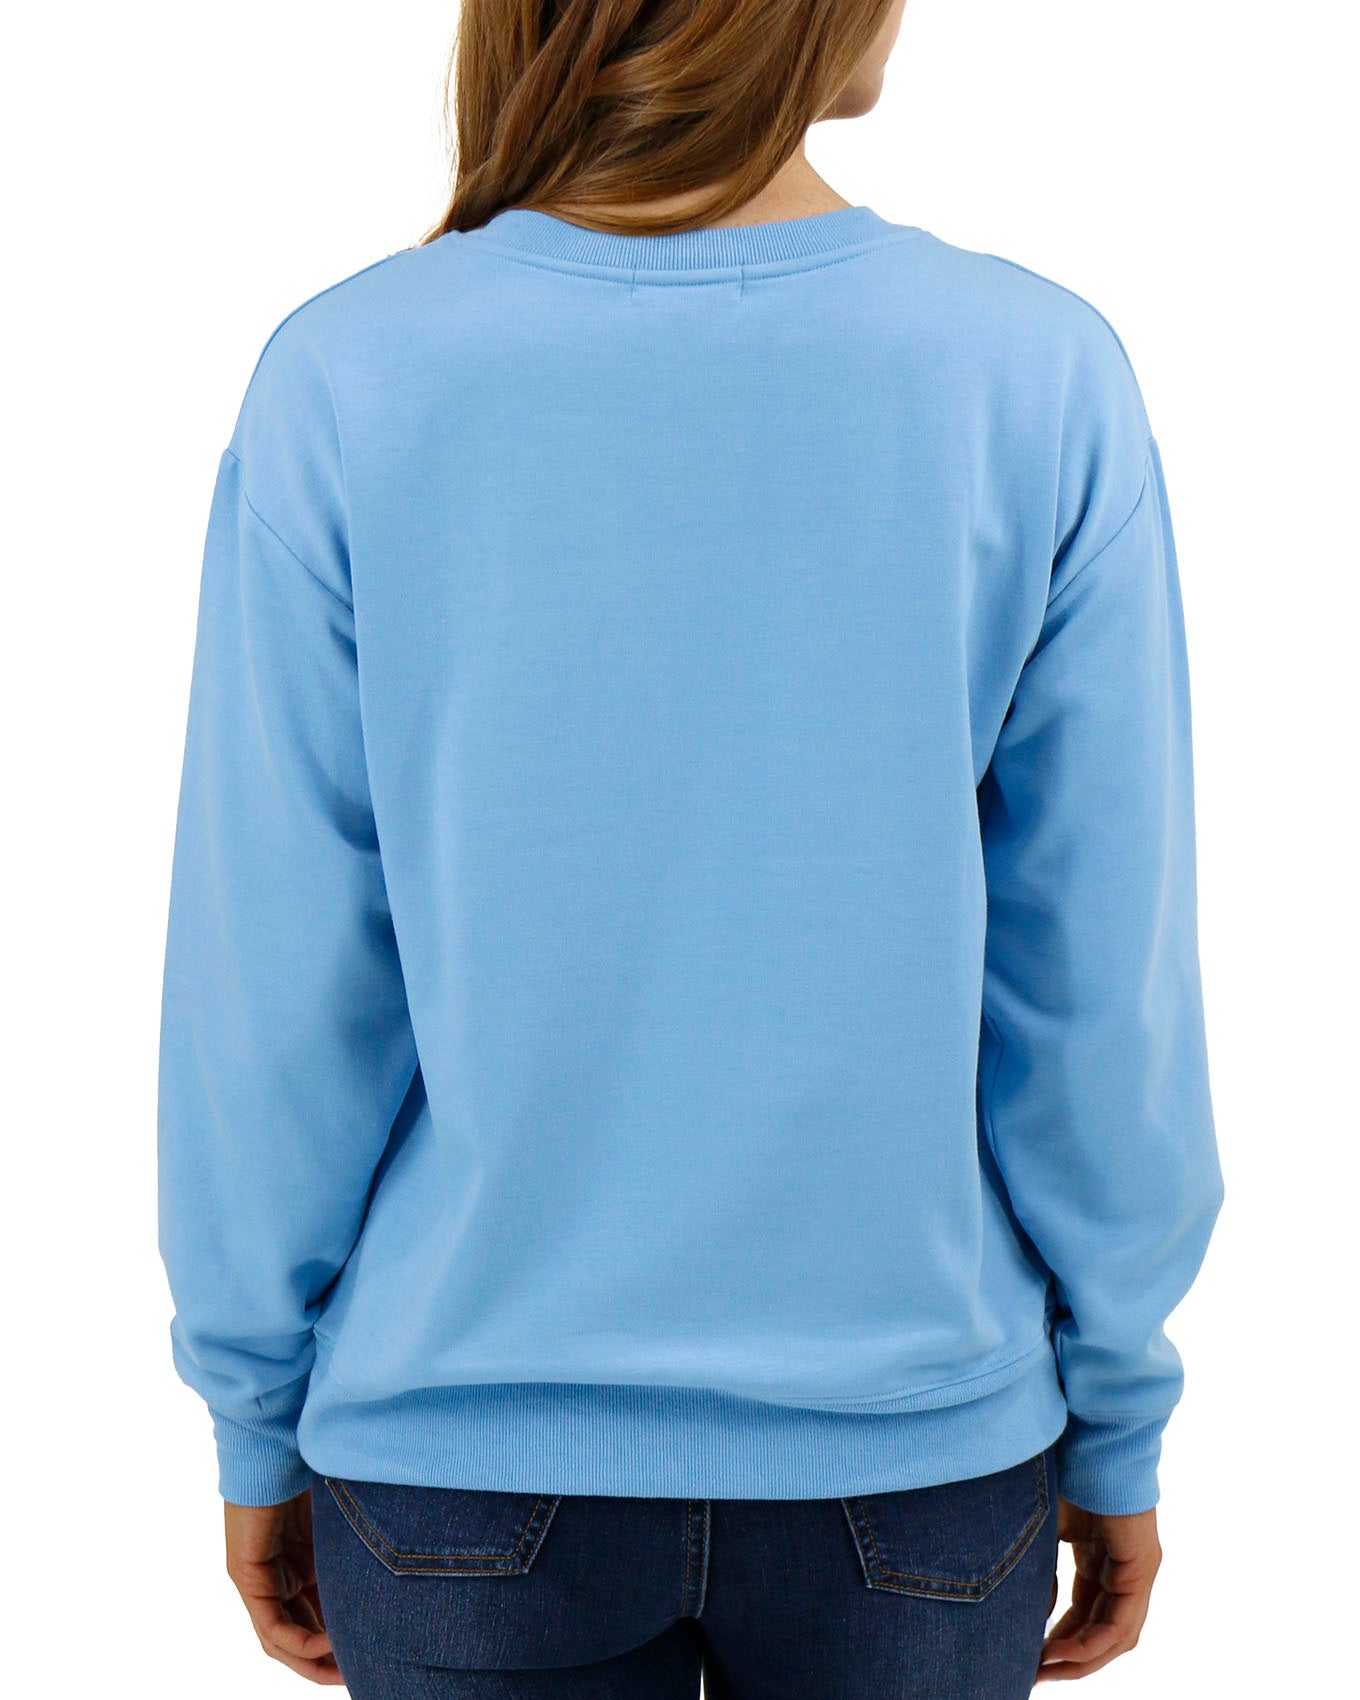 Signature Soft Embroidered Sweatshirt - Grace and Lace